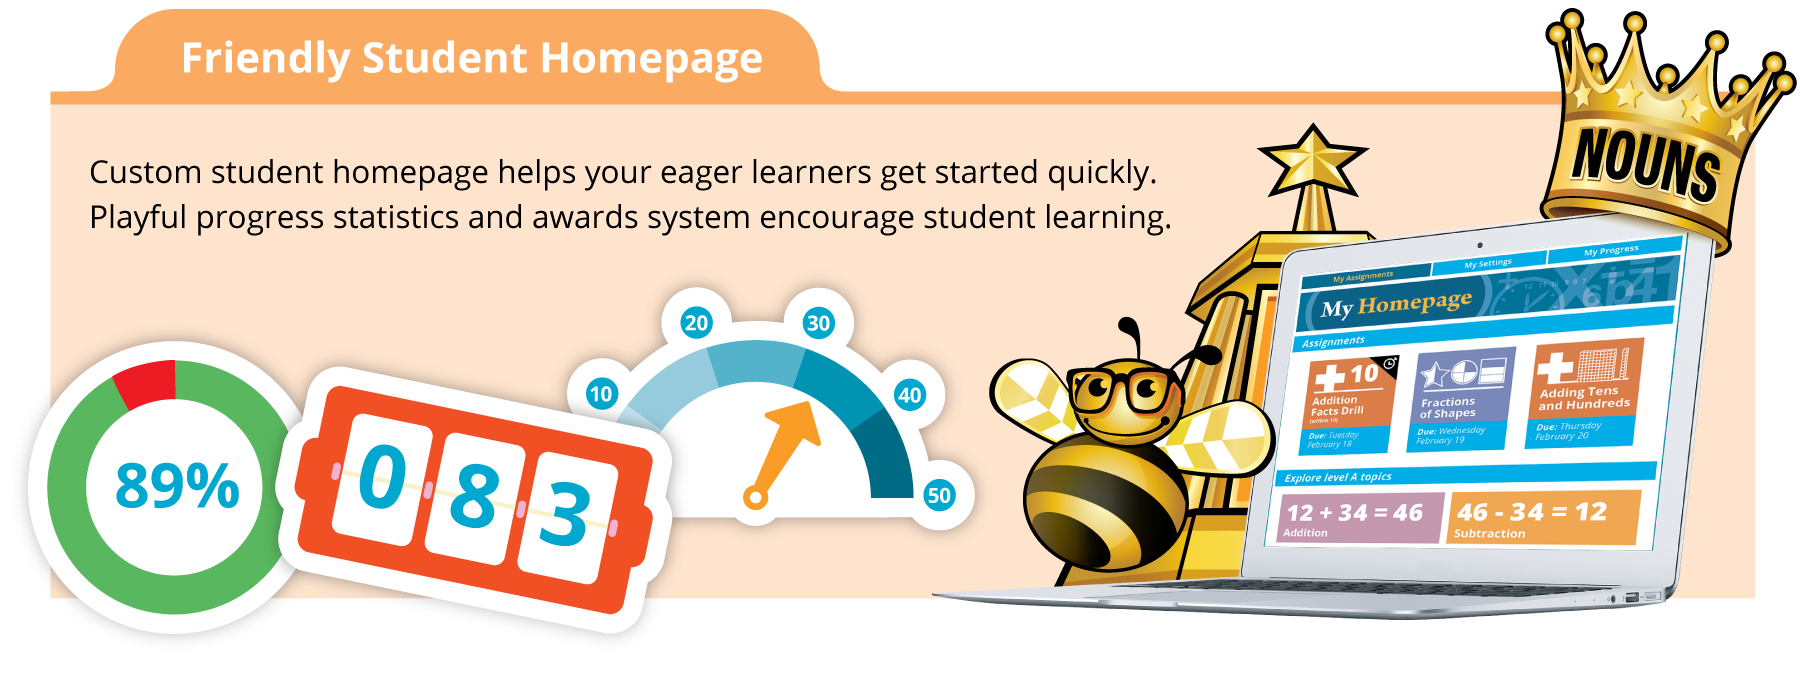 Custom student homepage helps your eager learners get started quickly.